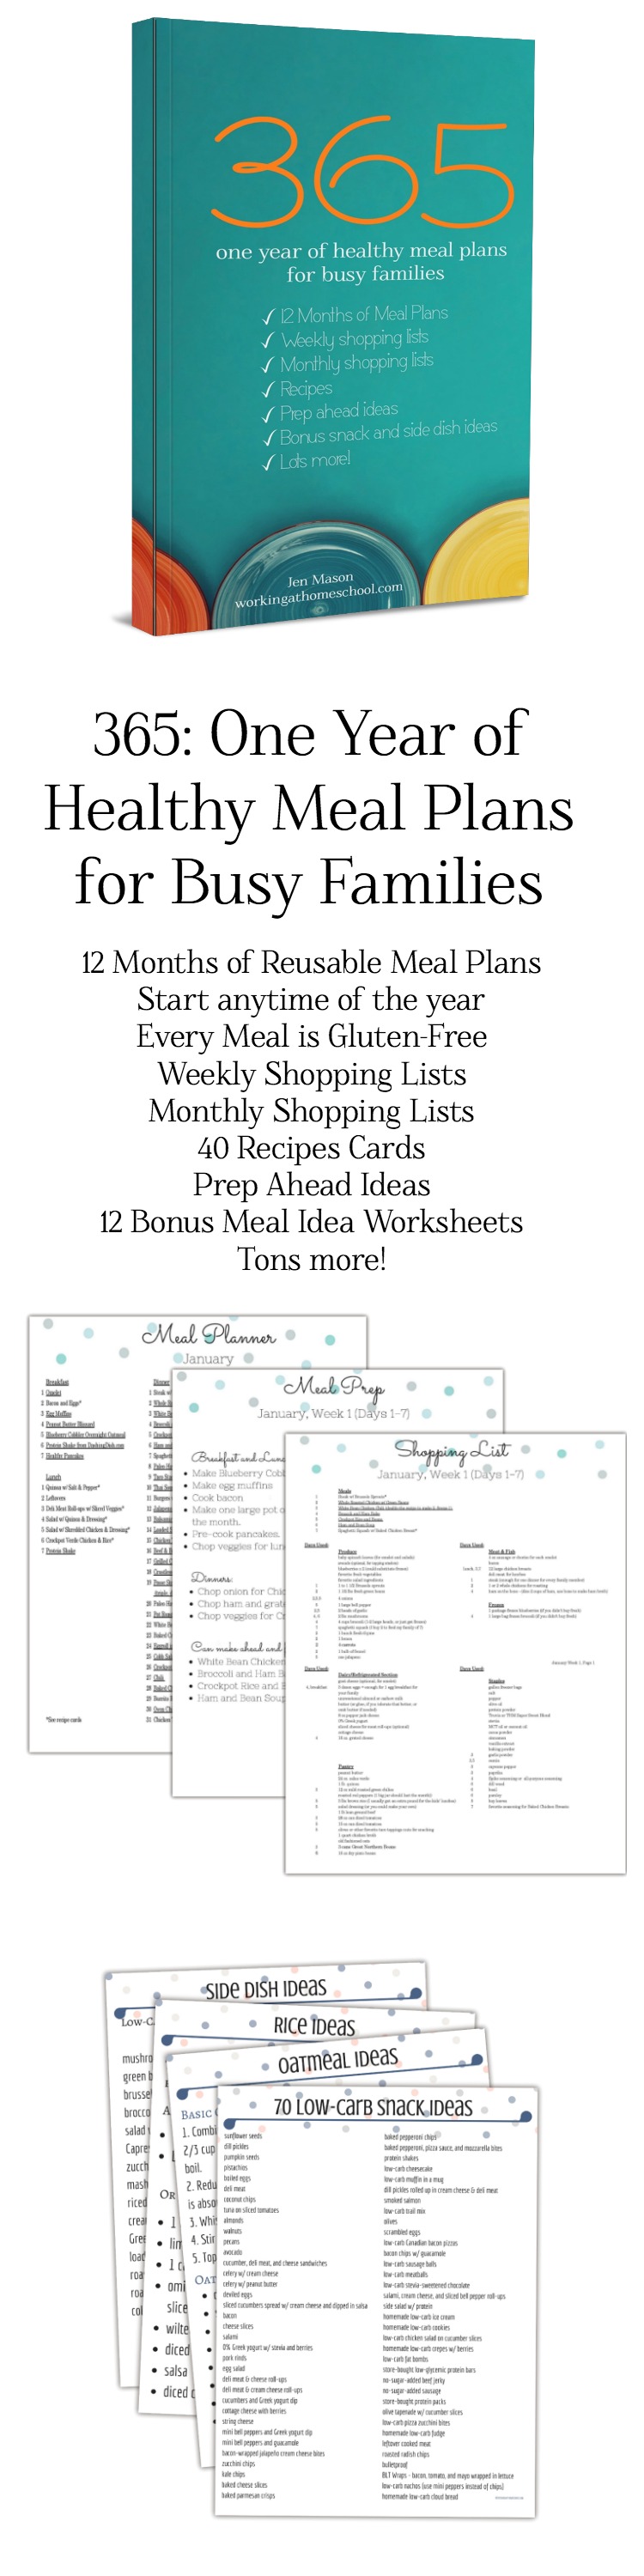 Wow! A full year of healthy meal plans and shopping lists! All gluten-free, too. I use this for THM, and I've saved tons of time because I don't have to meal plan anymore!